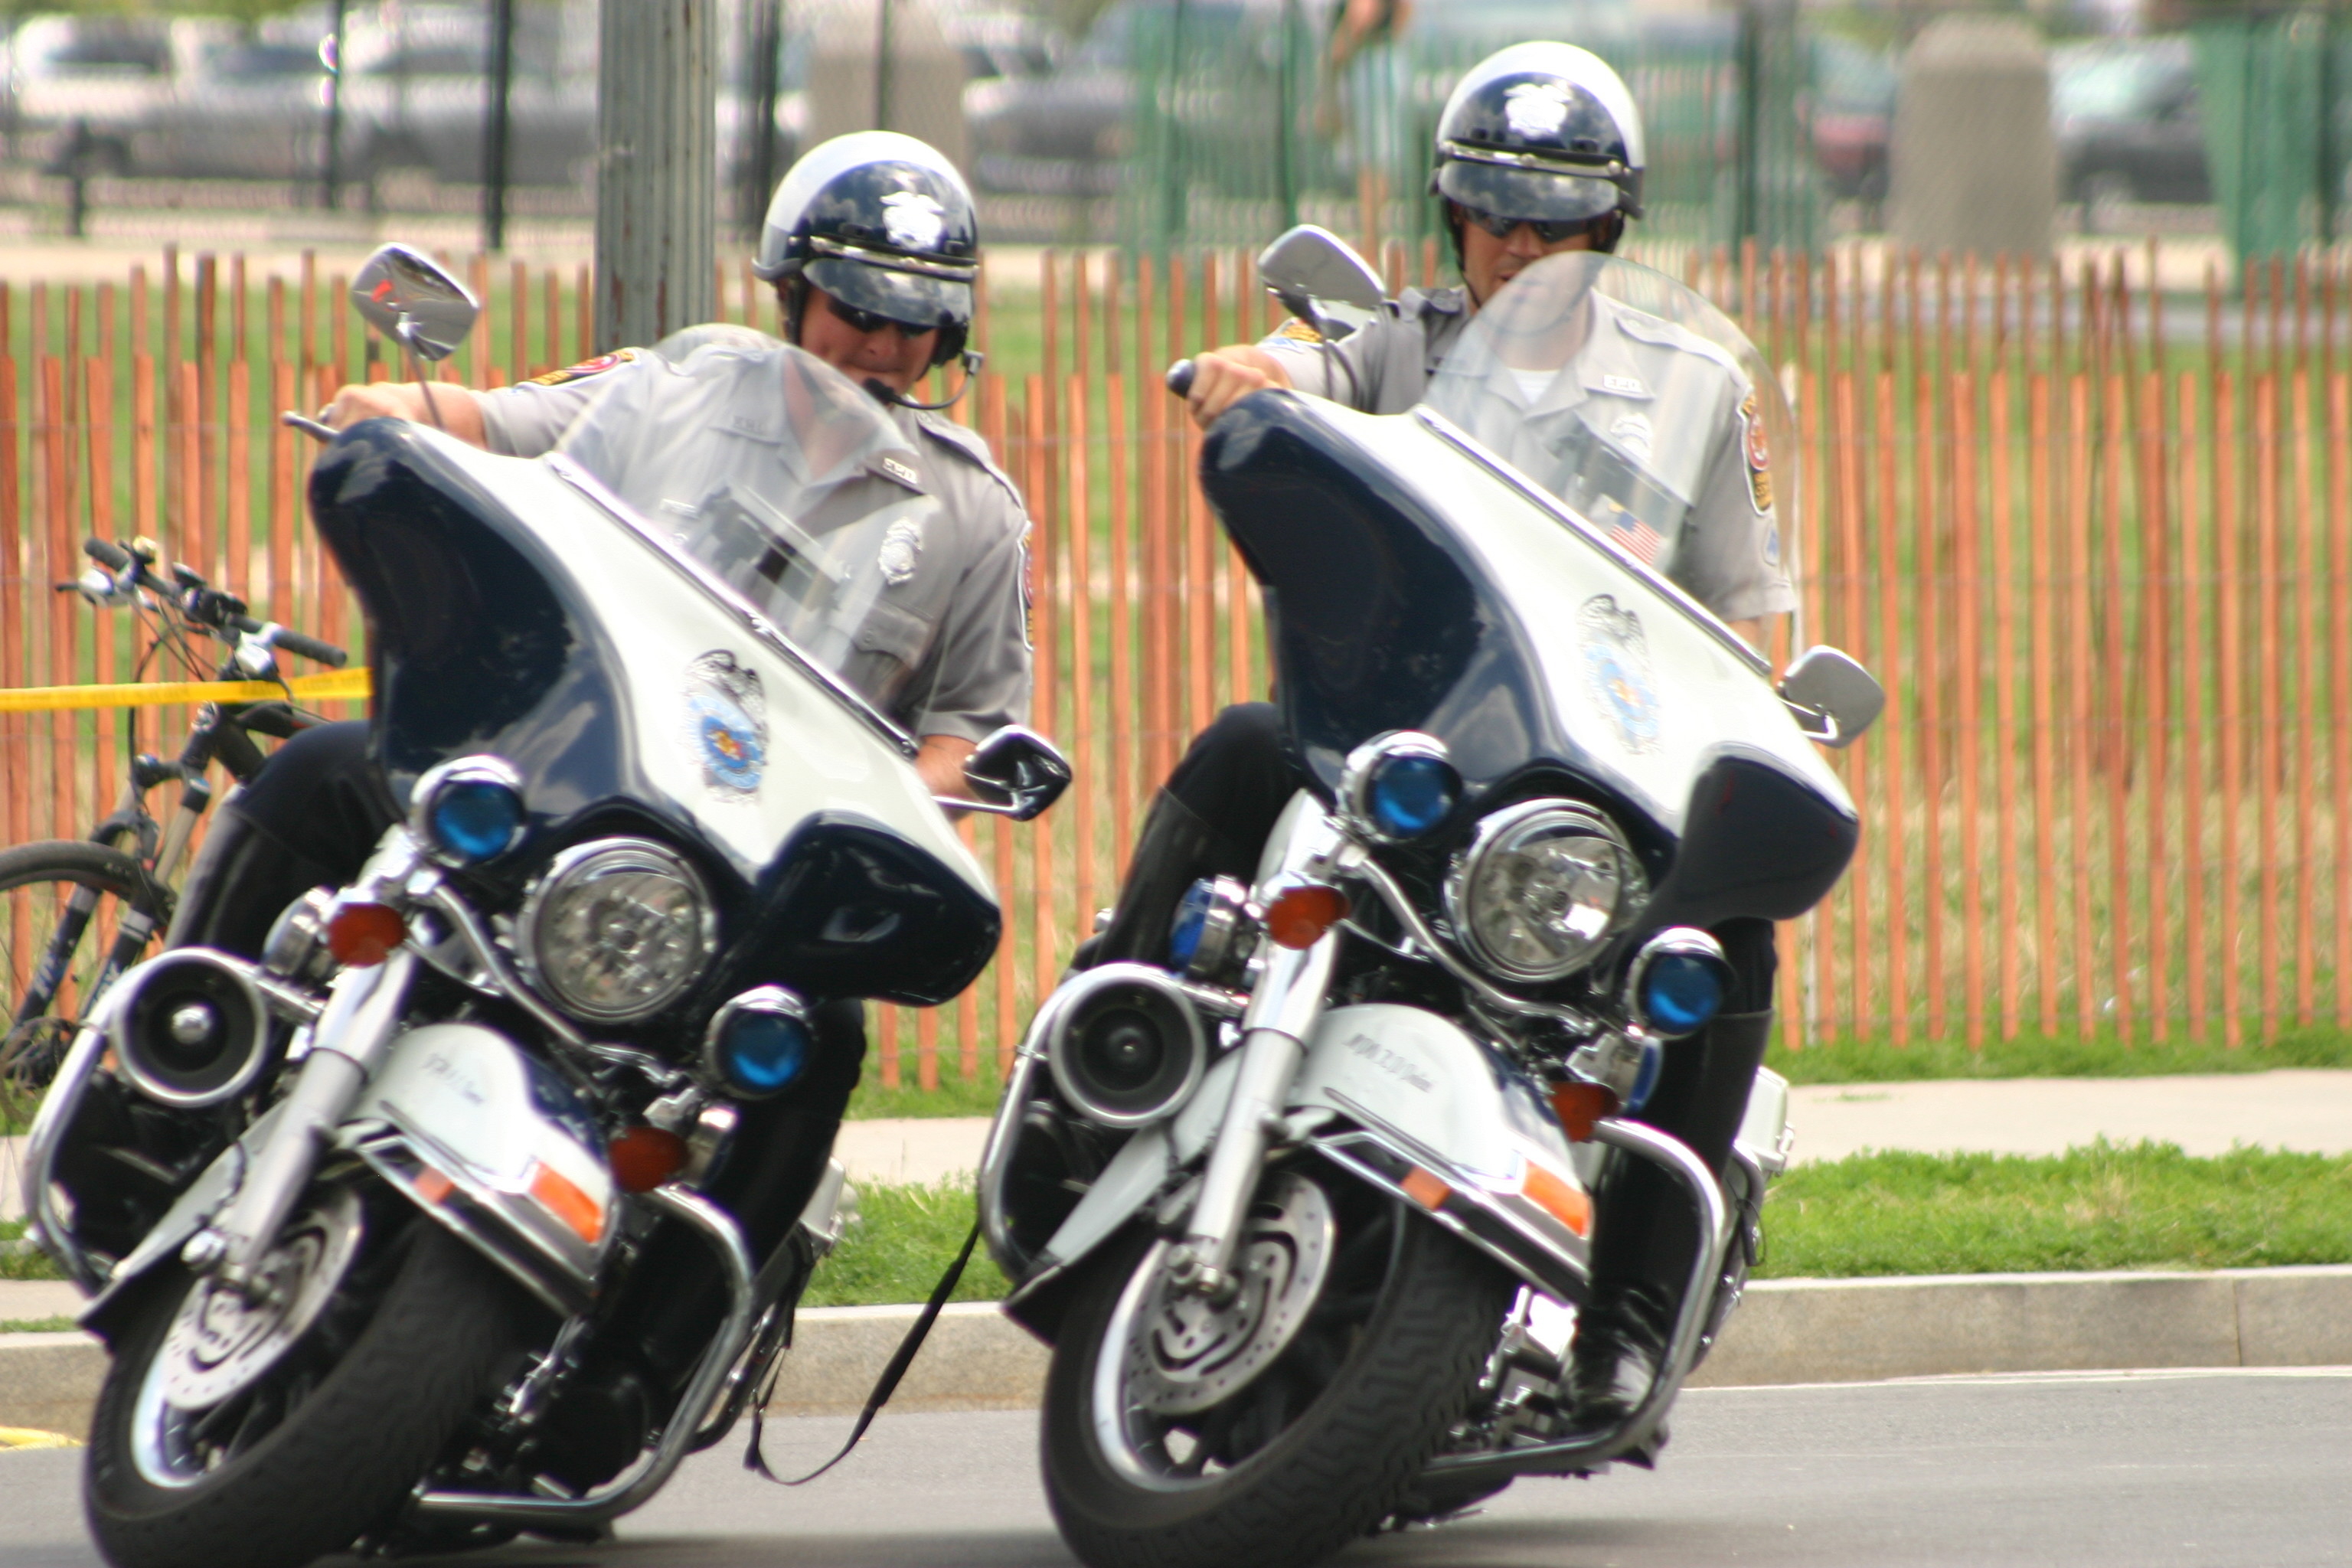 Police Motorcycle Photos